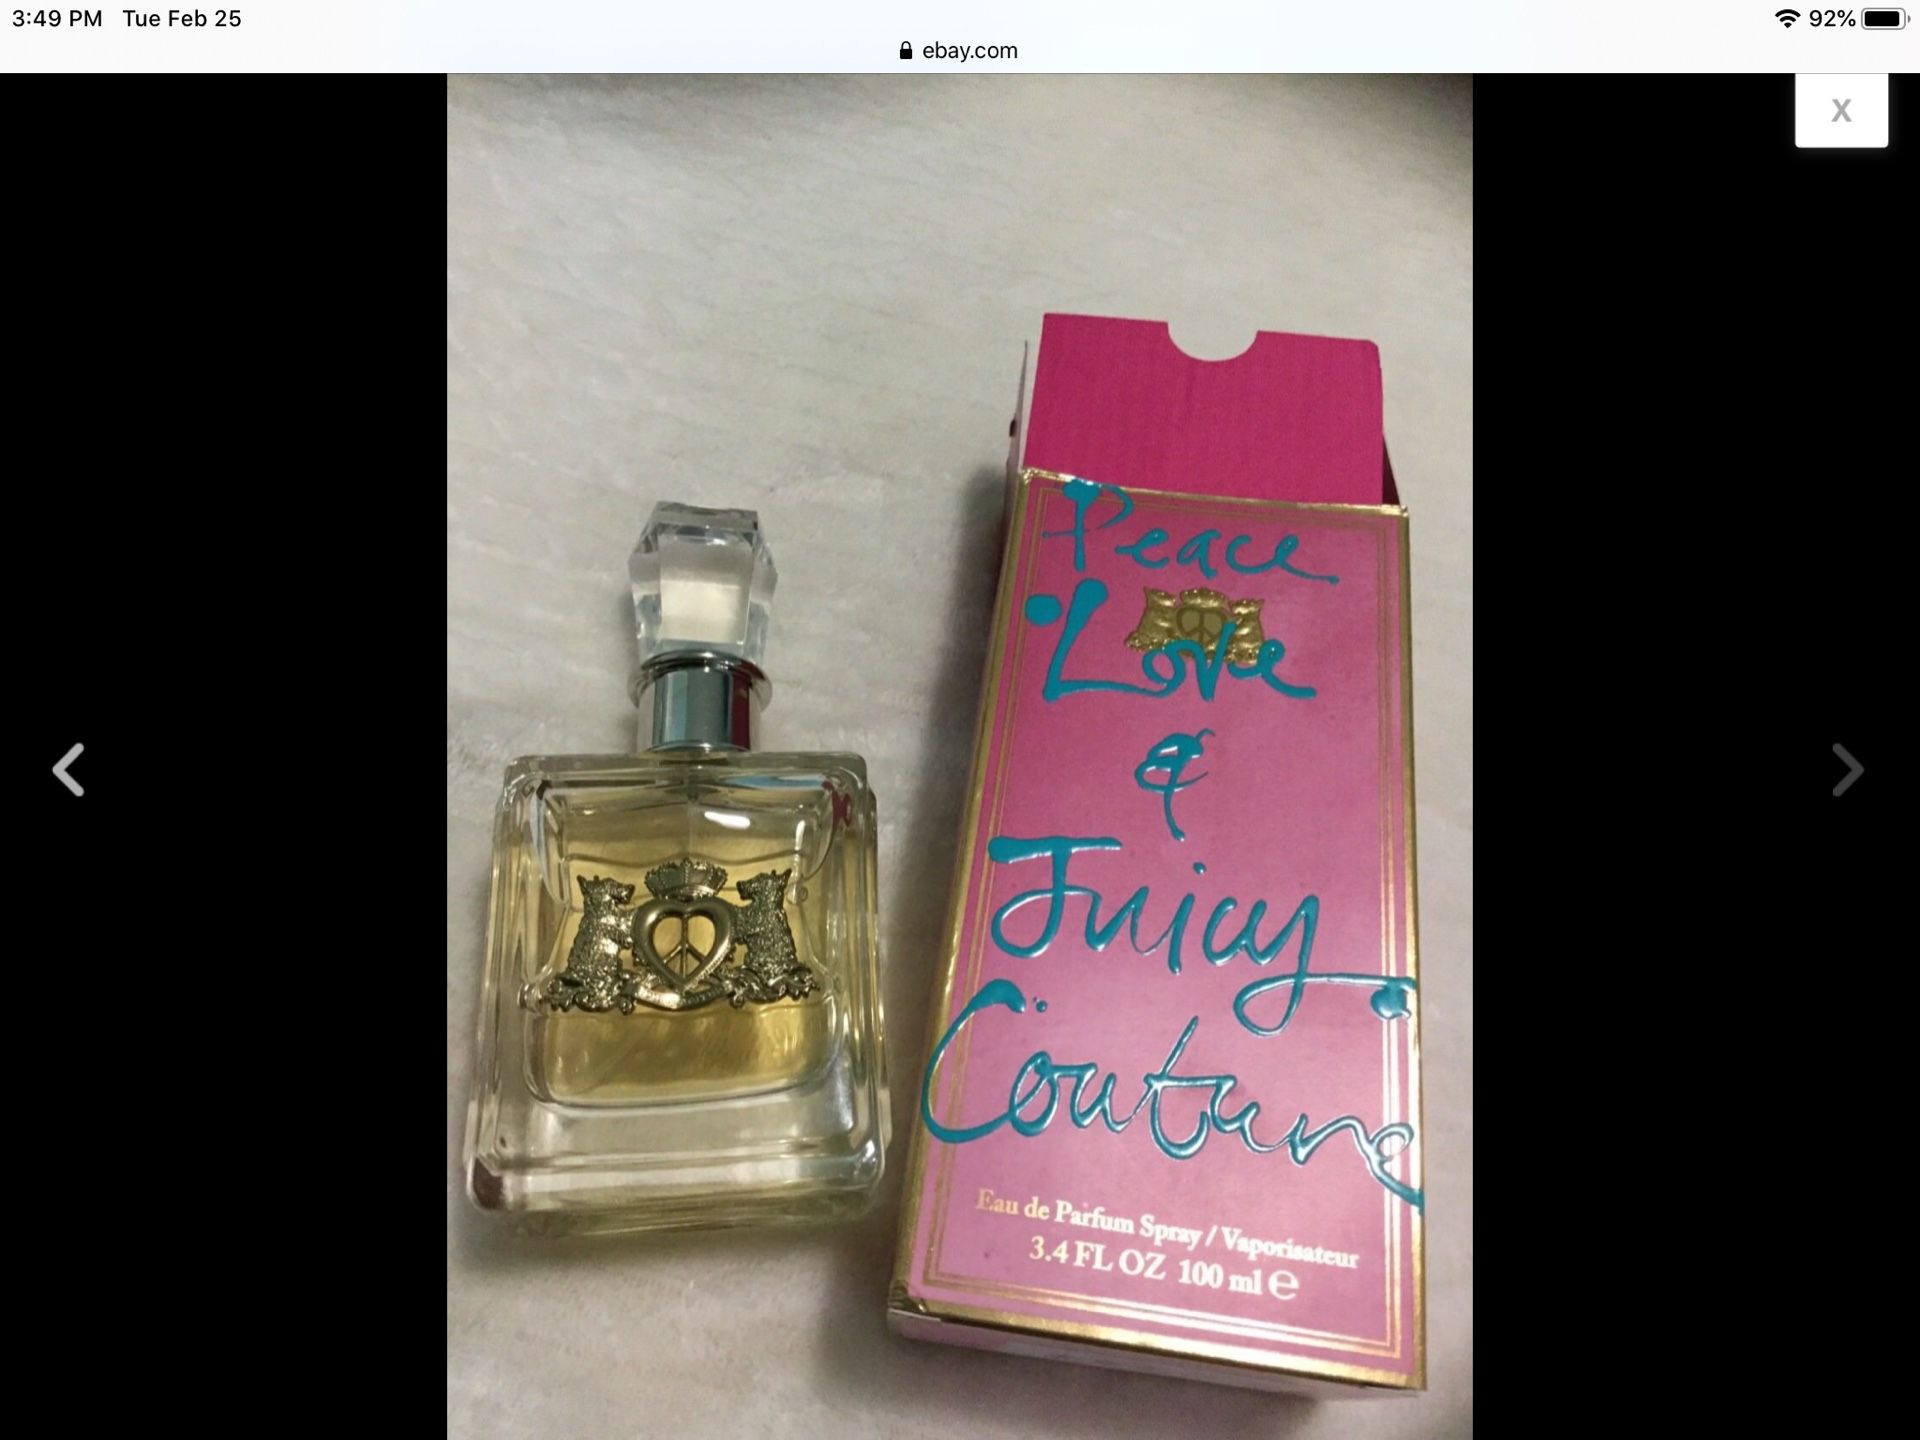 Juicy couture peace love and juicy perfume 3.4 floz